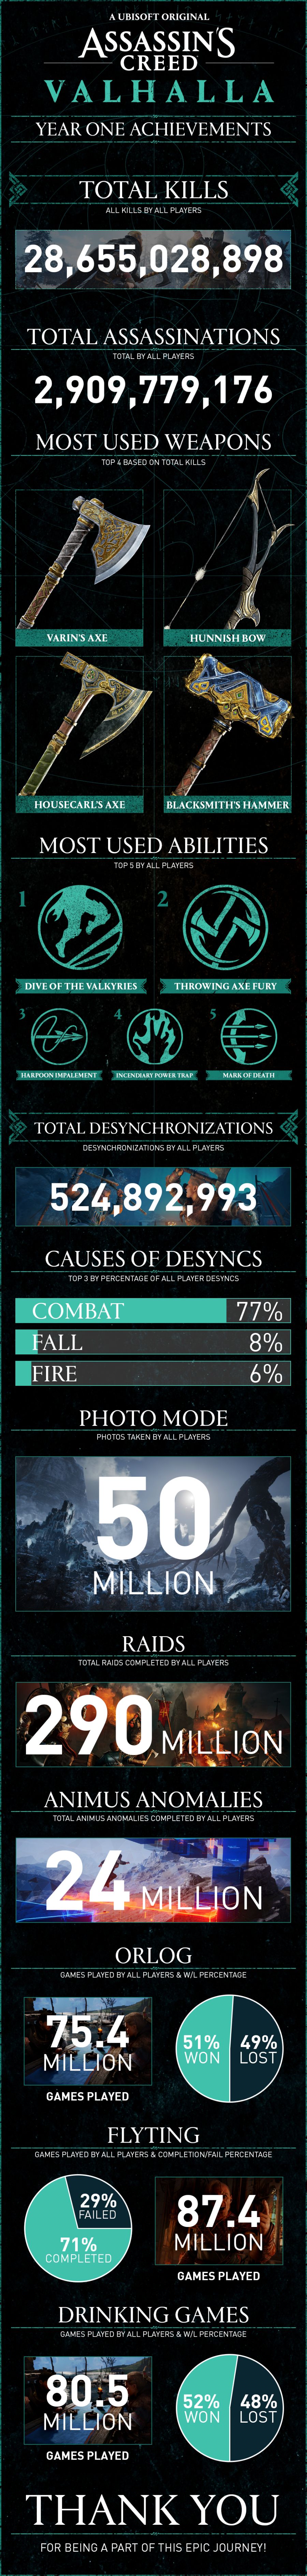 ACVH_Infographic_final.png